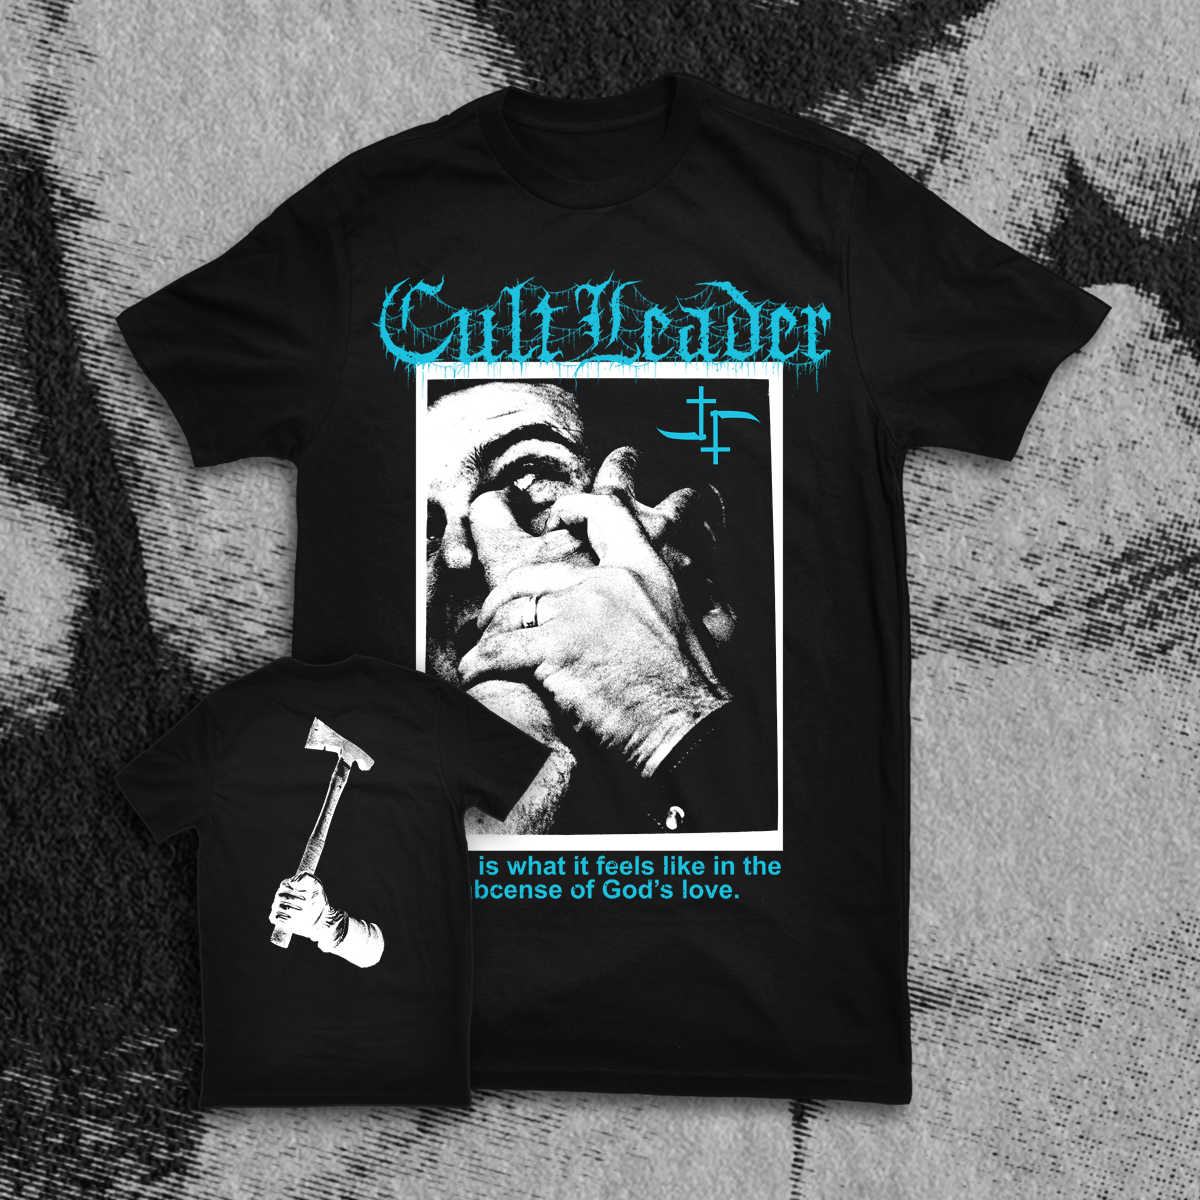 CULT LEADER "THIS IS WHAT IT FEELS LIKE" SHIRT